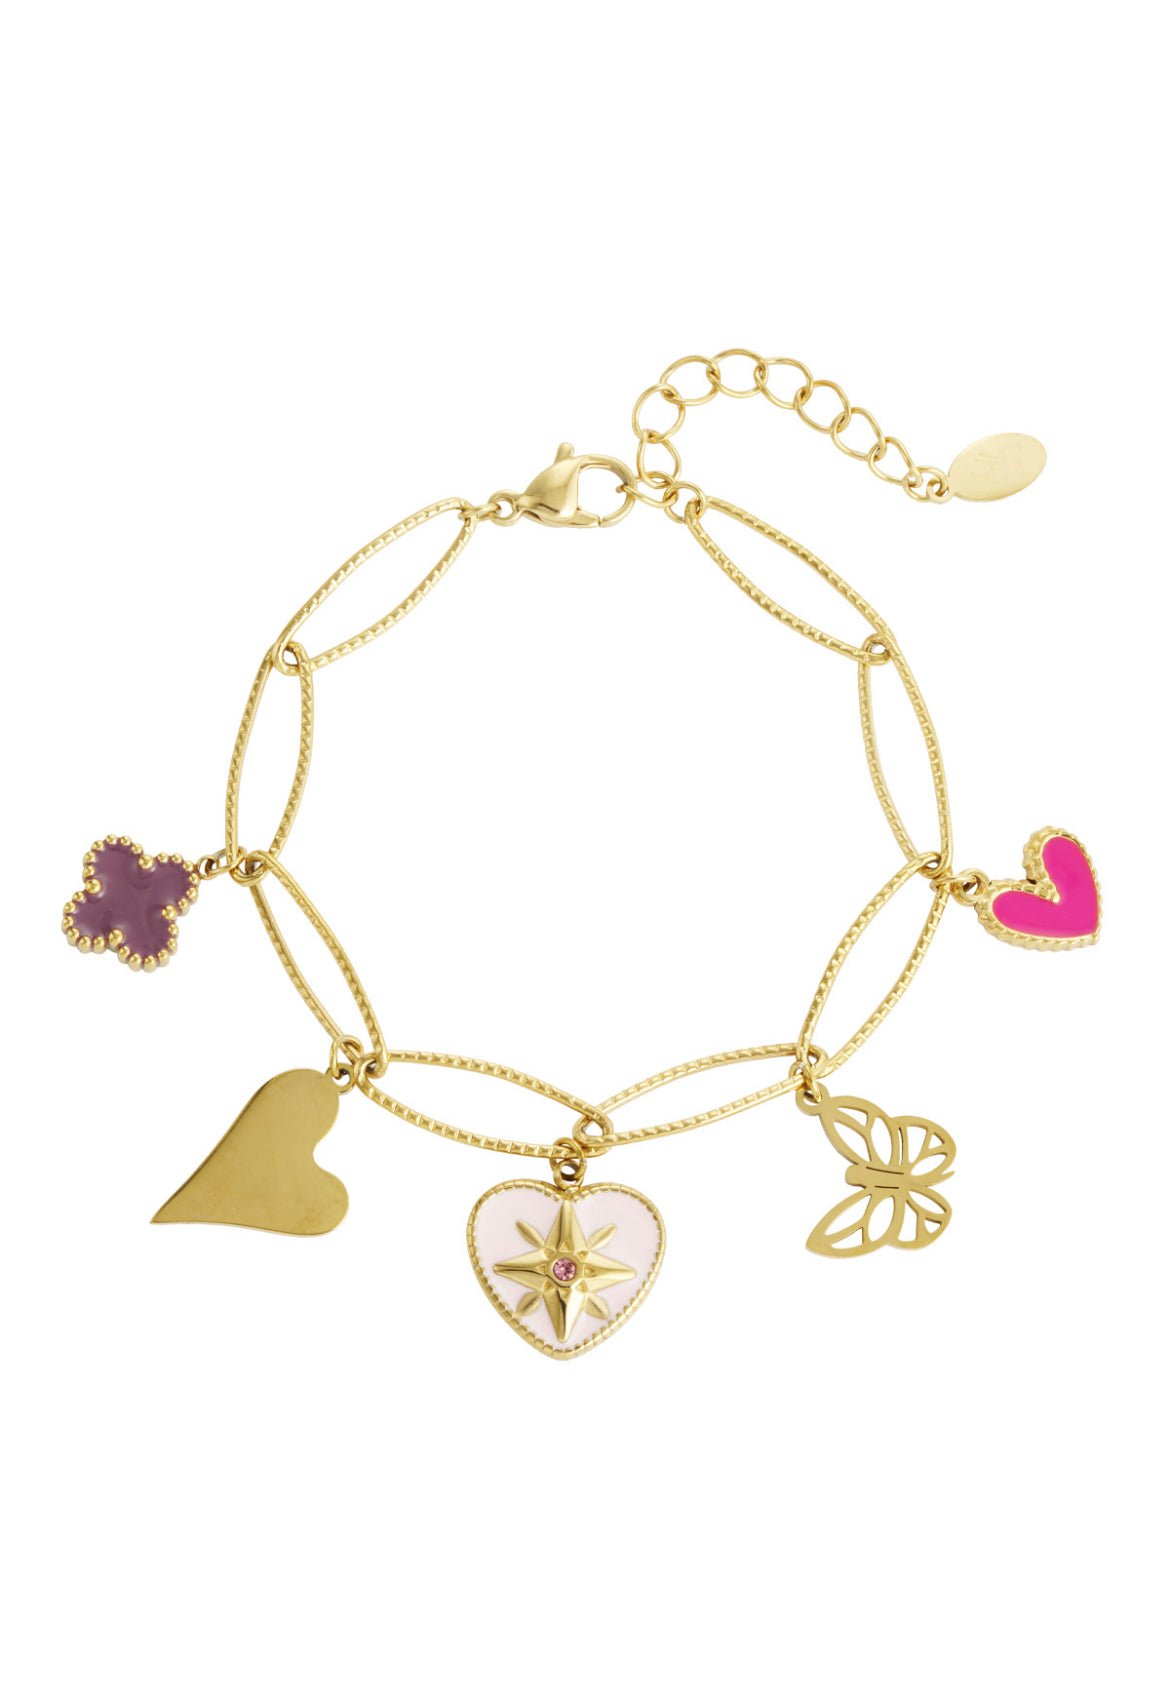 ♥︎LOVELY BUTTERFLY ARMBAND - My Favourites